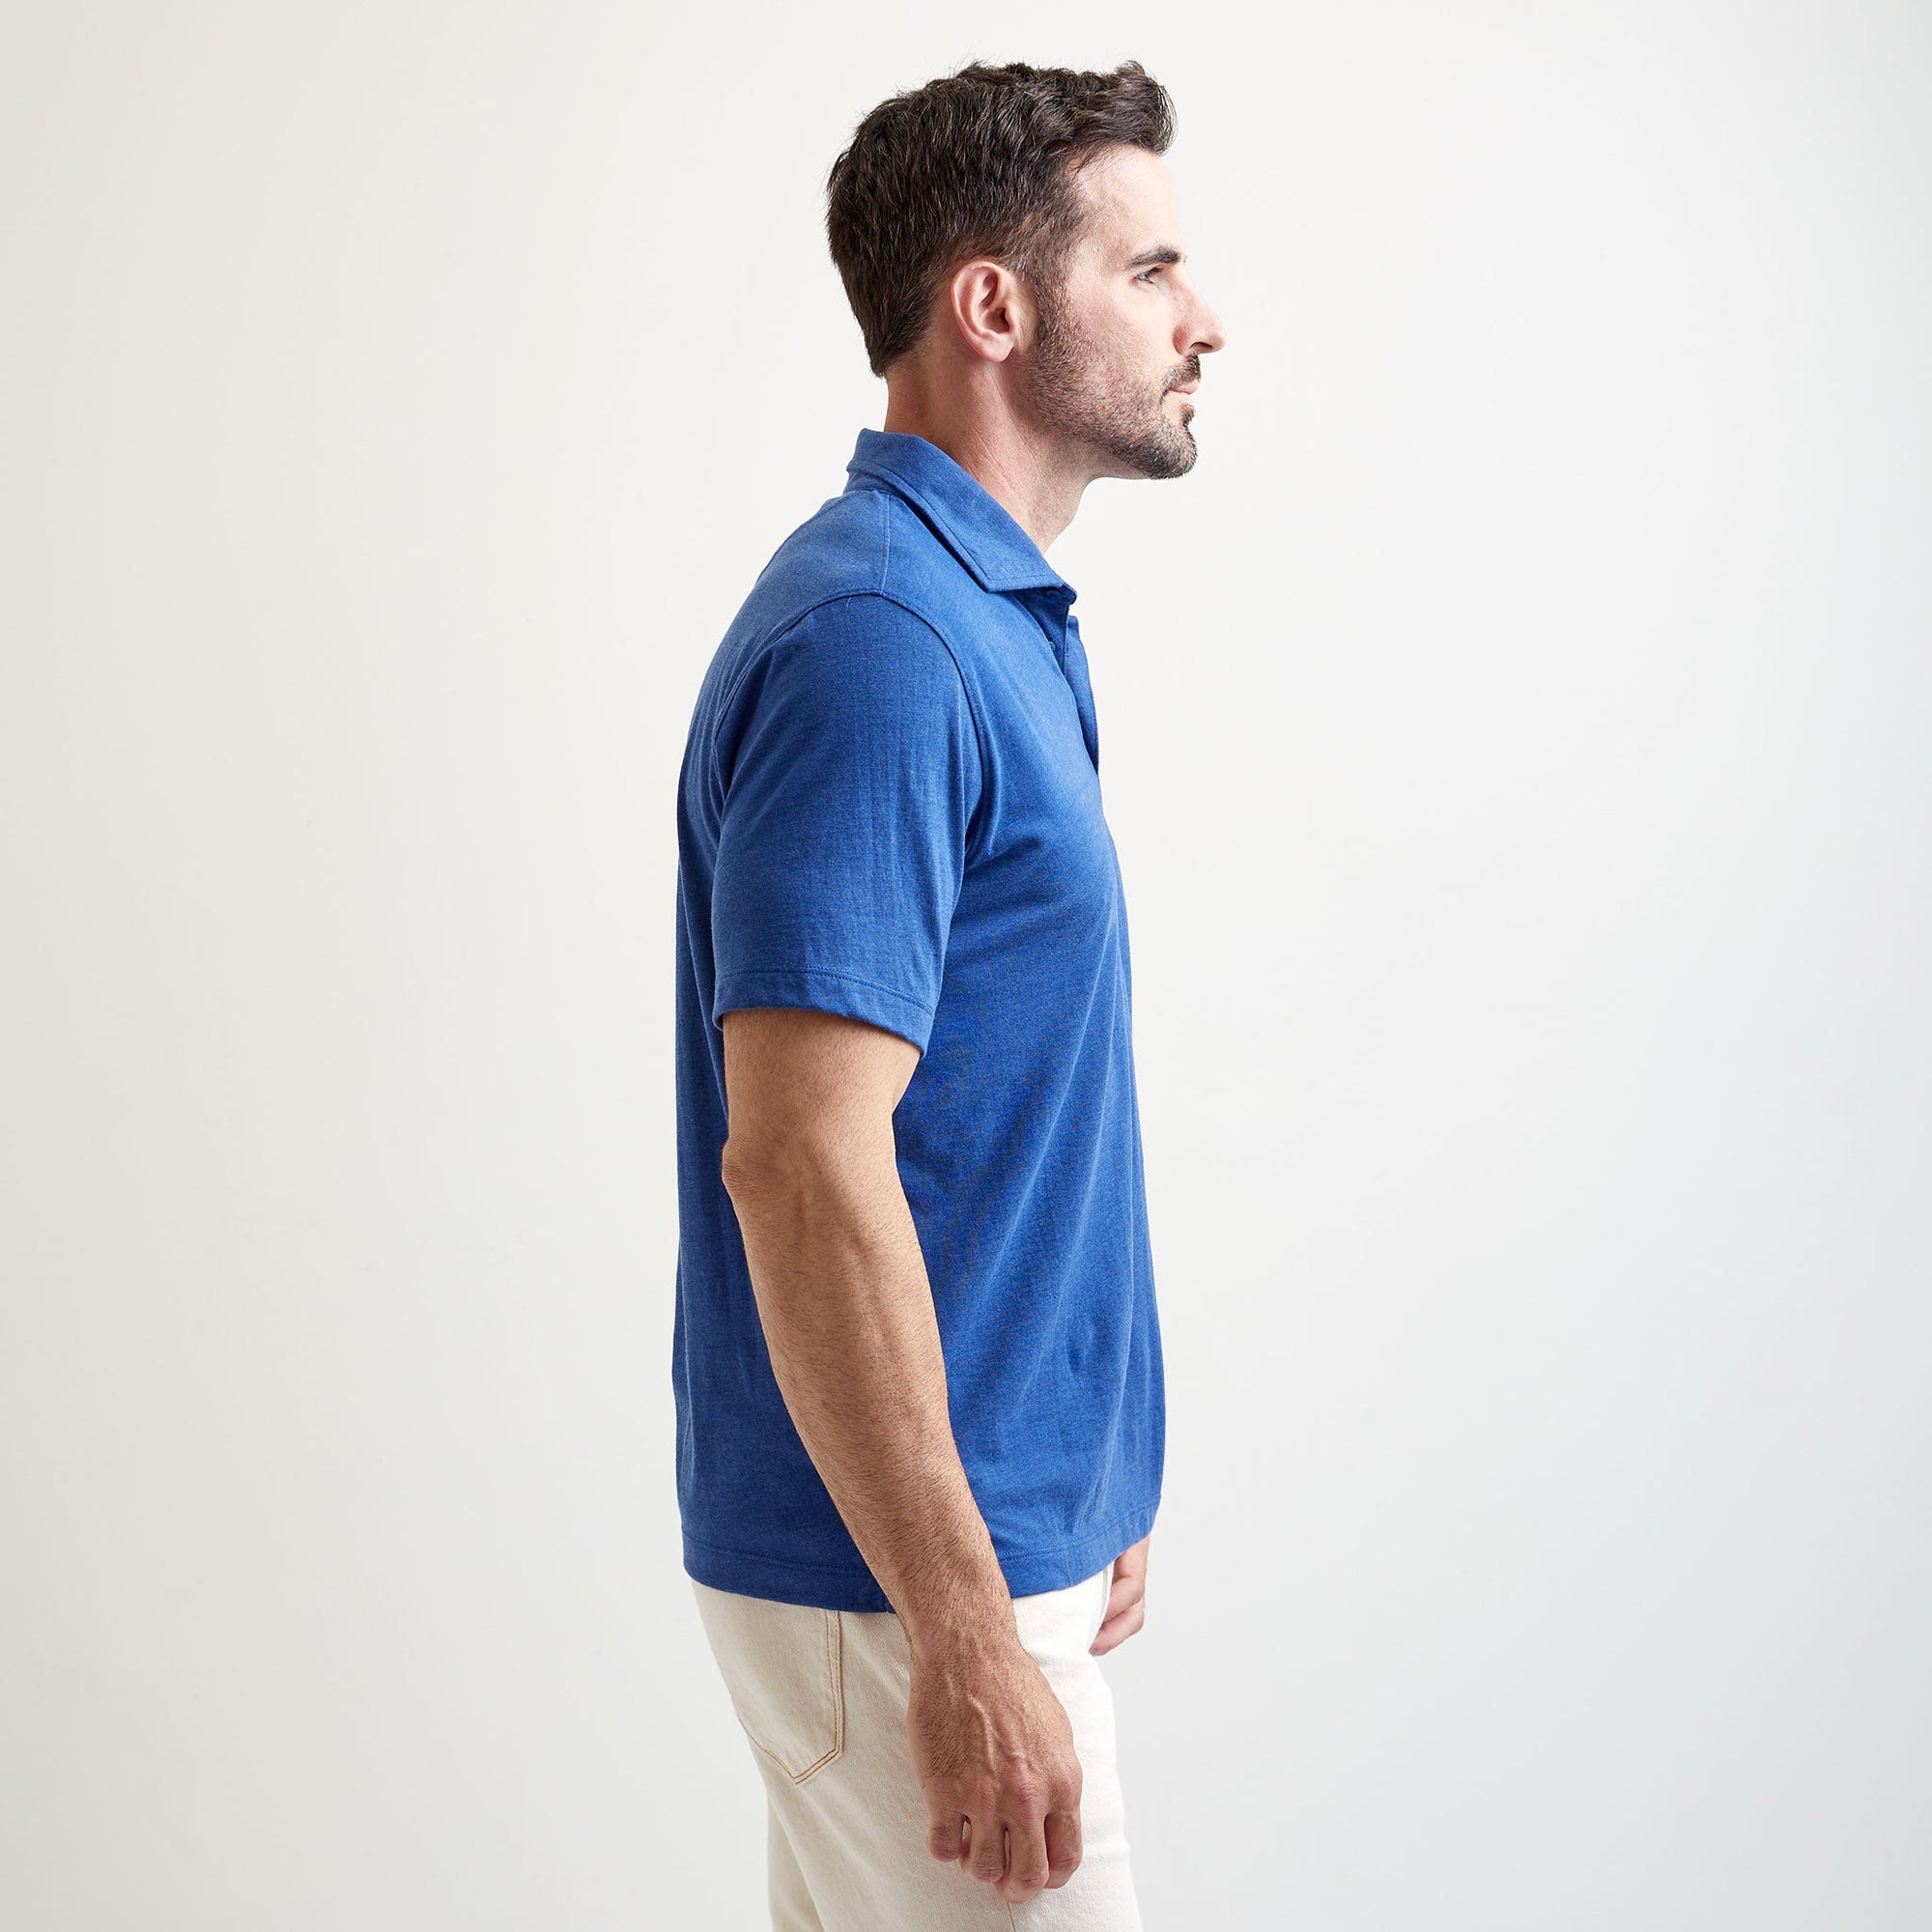 Bel Air Cutaway Collar Polo in Bright Blue Mix by Left Coast Tee